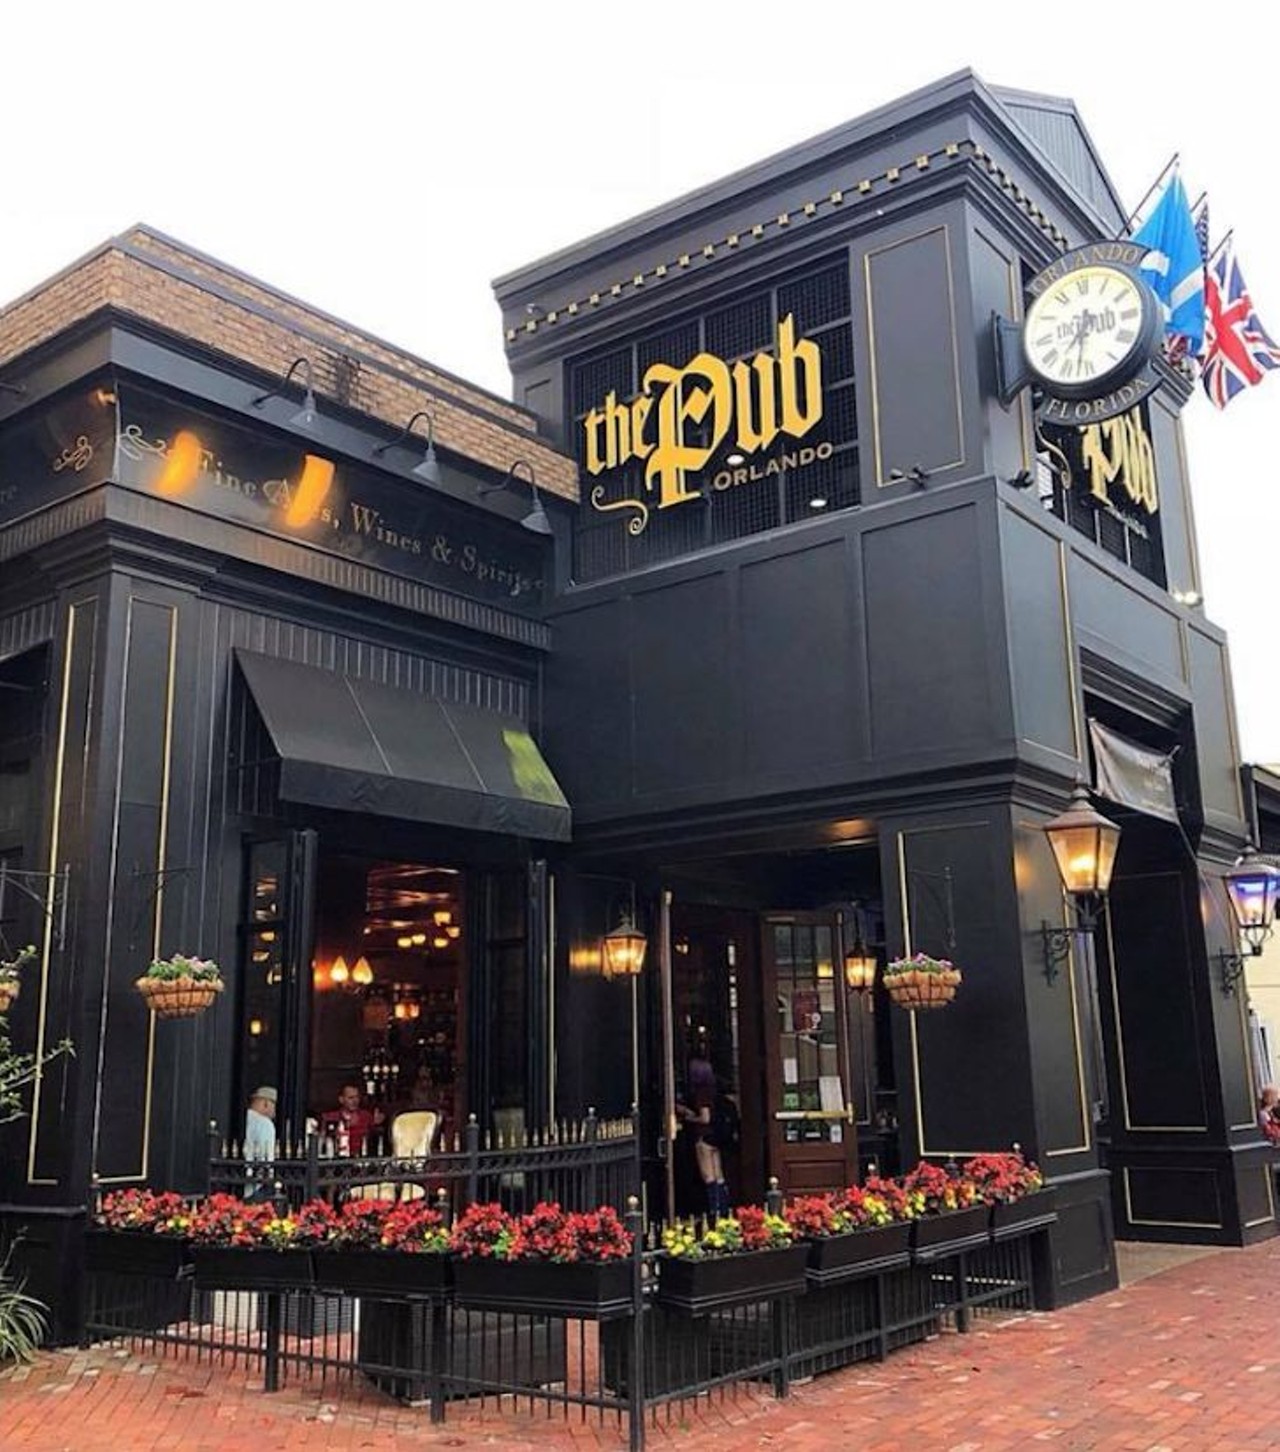 The Pub
9101 International Drive, 407-352-2305
Estimated Uber ride from Convention Center: 4 minutes
For some &#147;British inspired, American crafted&#148; food, this is the place to go for the traditional fish and chips. Hop into England through the surroundings of Union Jack flags and by enjoying a &#147;Bloody Brilliant Burger.&#148;
Photo via Photo via The Pub Orlando/Facebook